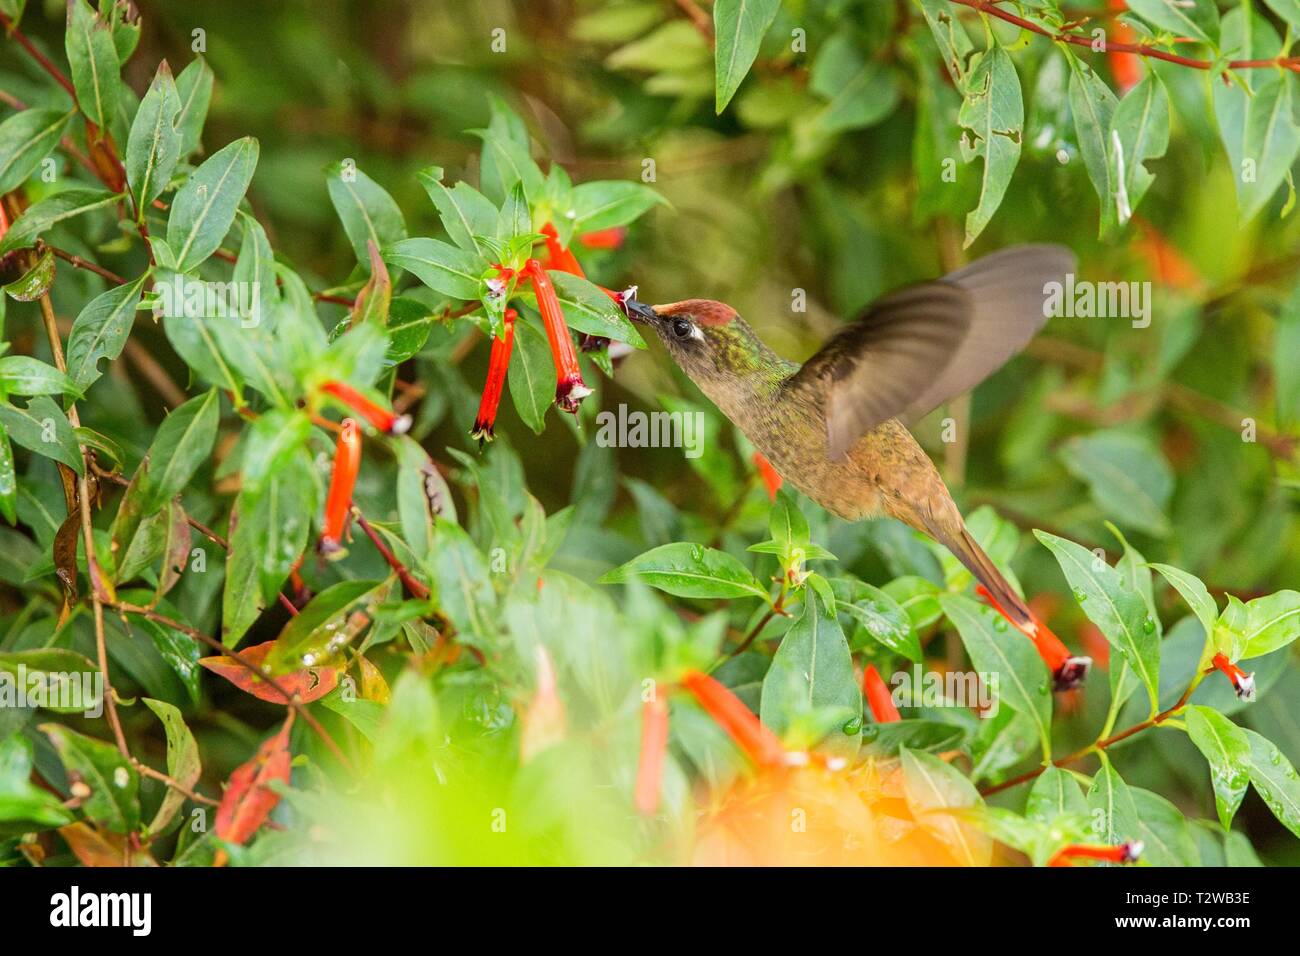 Endemic hummingbird hovering next to red flower in rain,tropical forest, Colombia, bird sucking nectar from blossom in garden,beautiful hummingbird wi Stock Photo